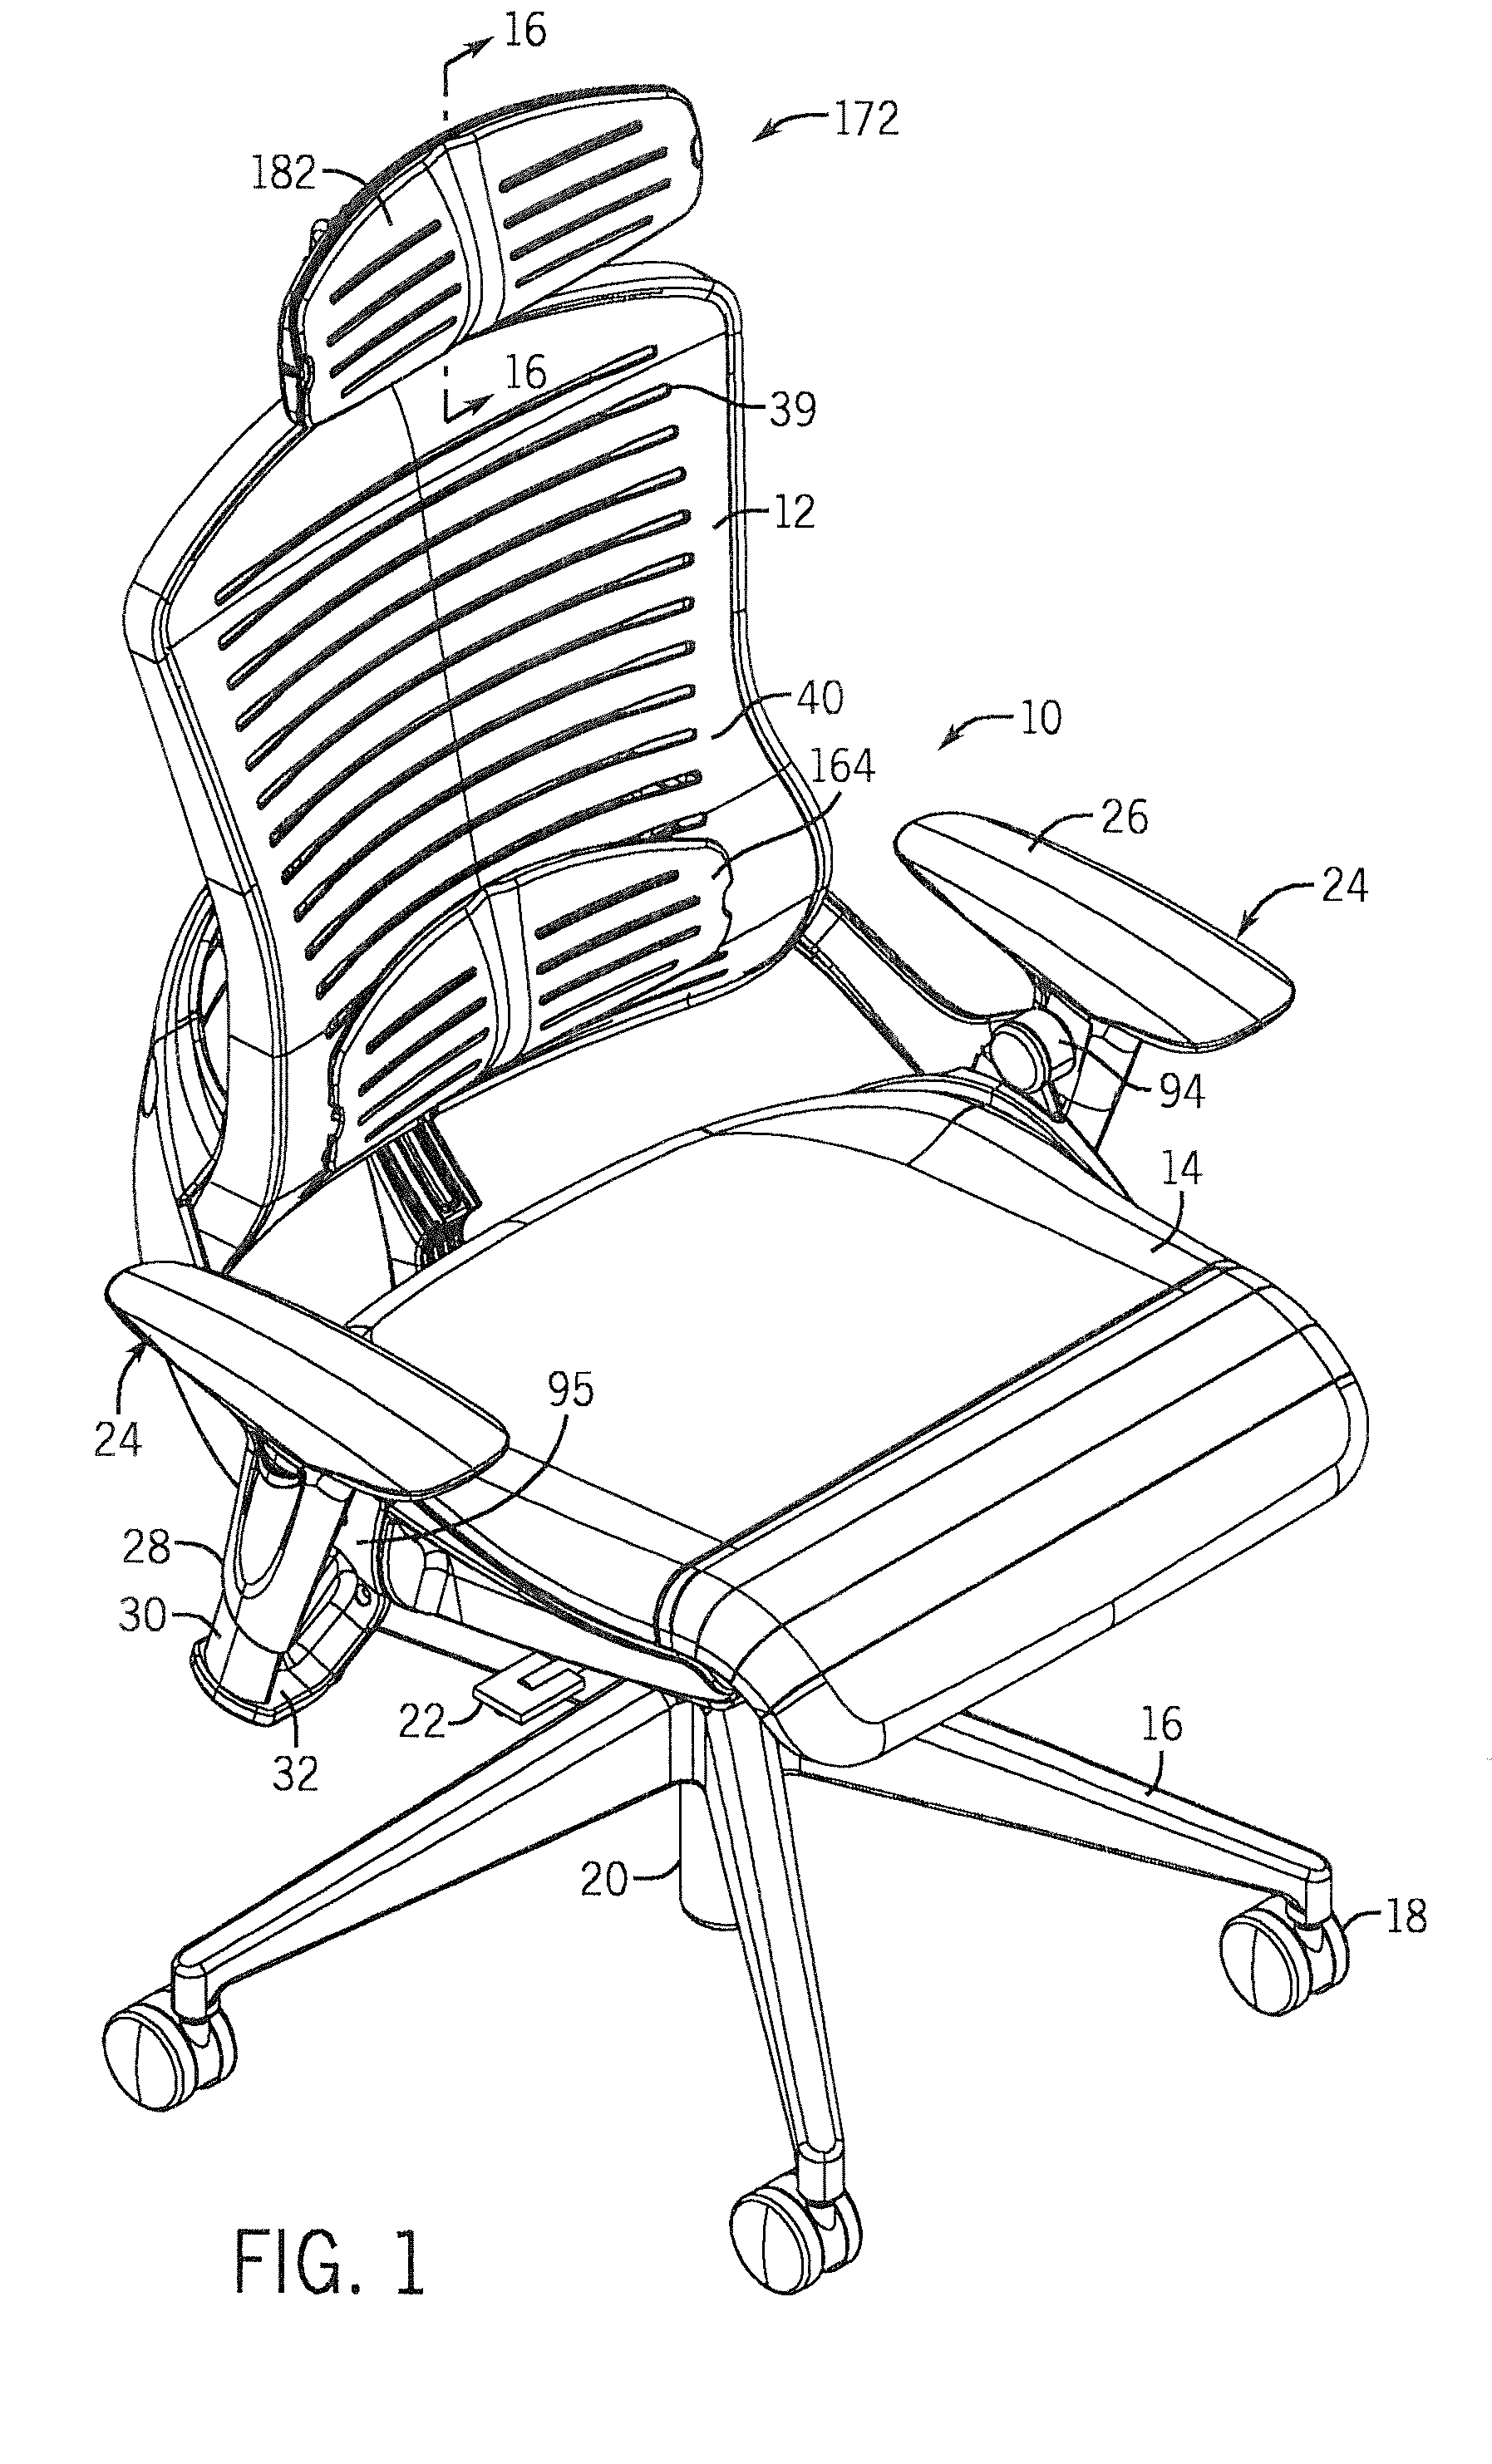 Chair with seat depth adjustment and back support